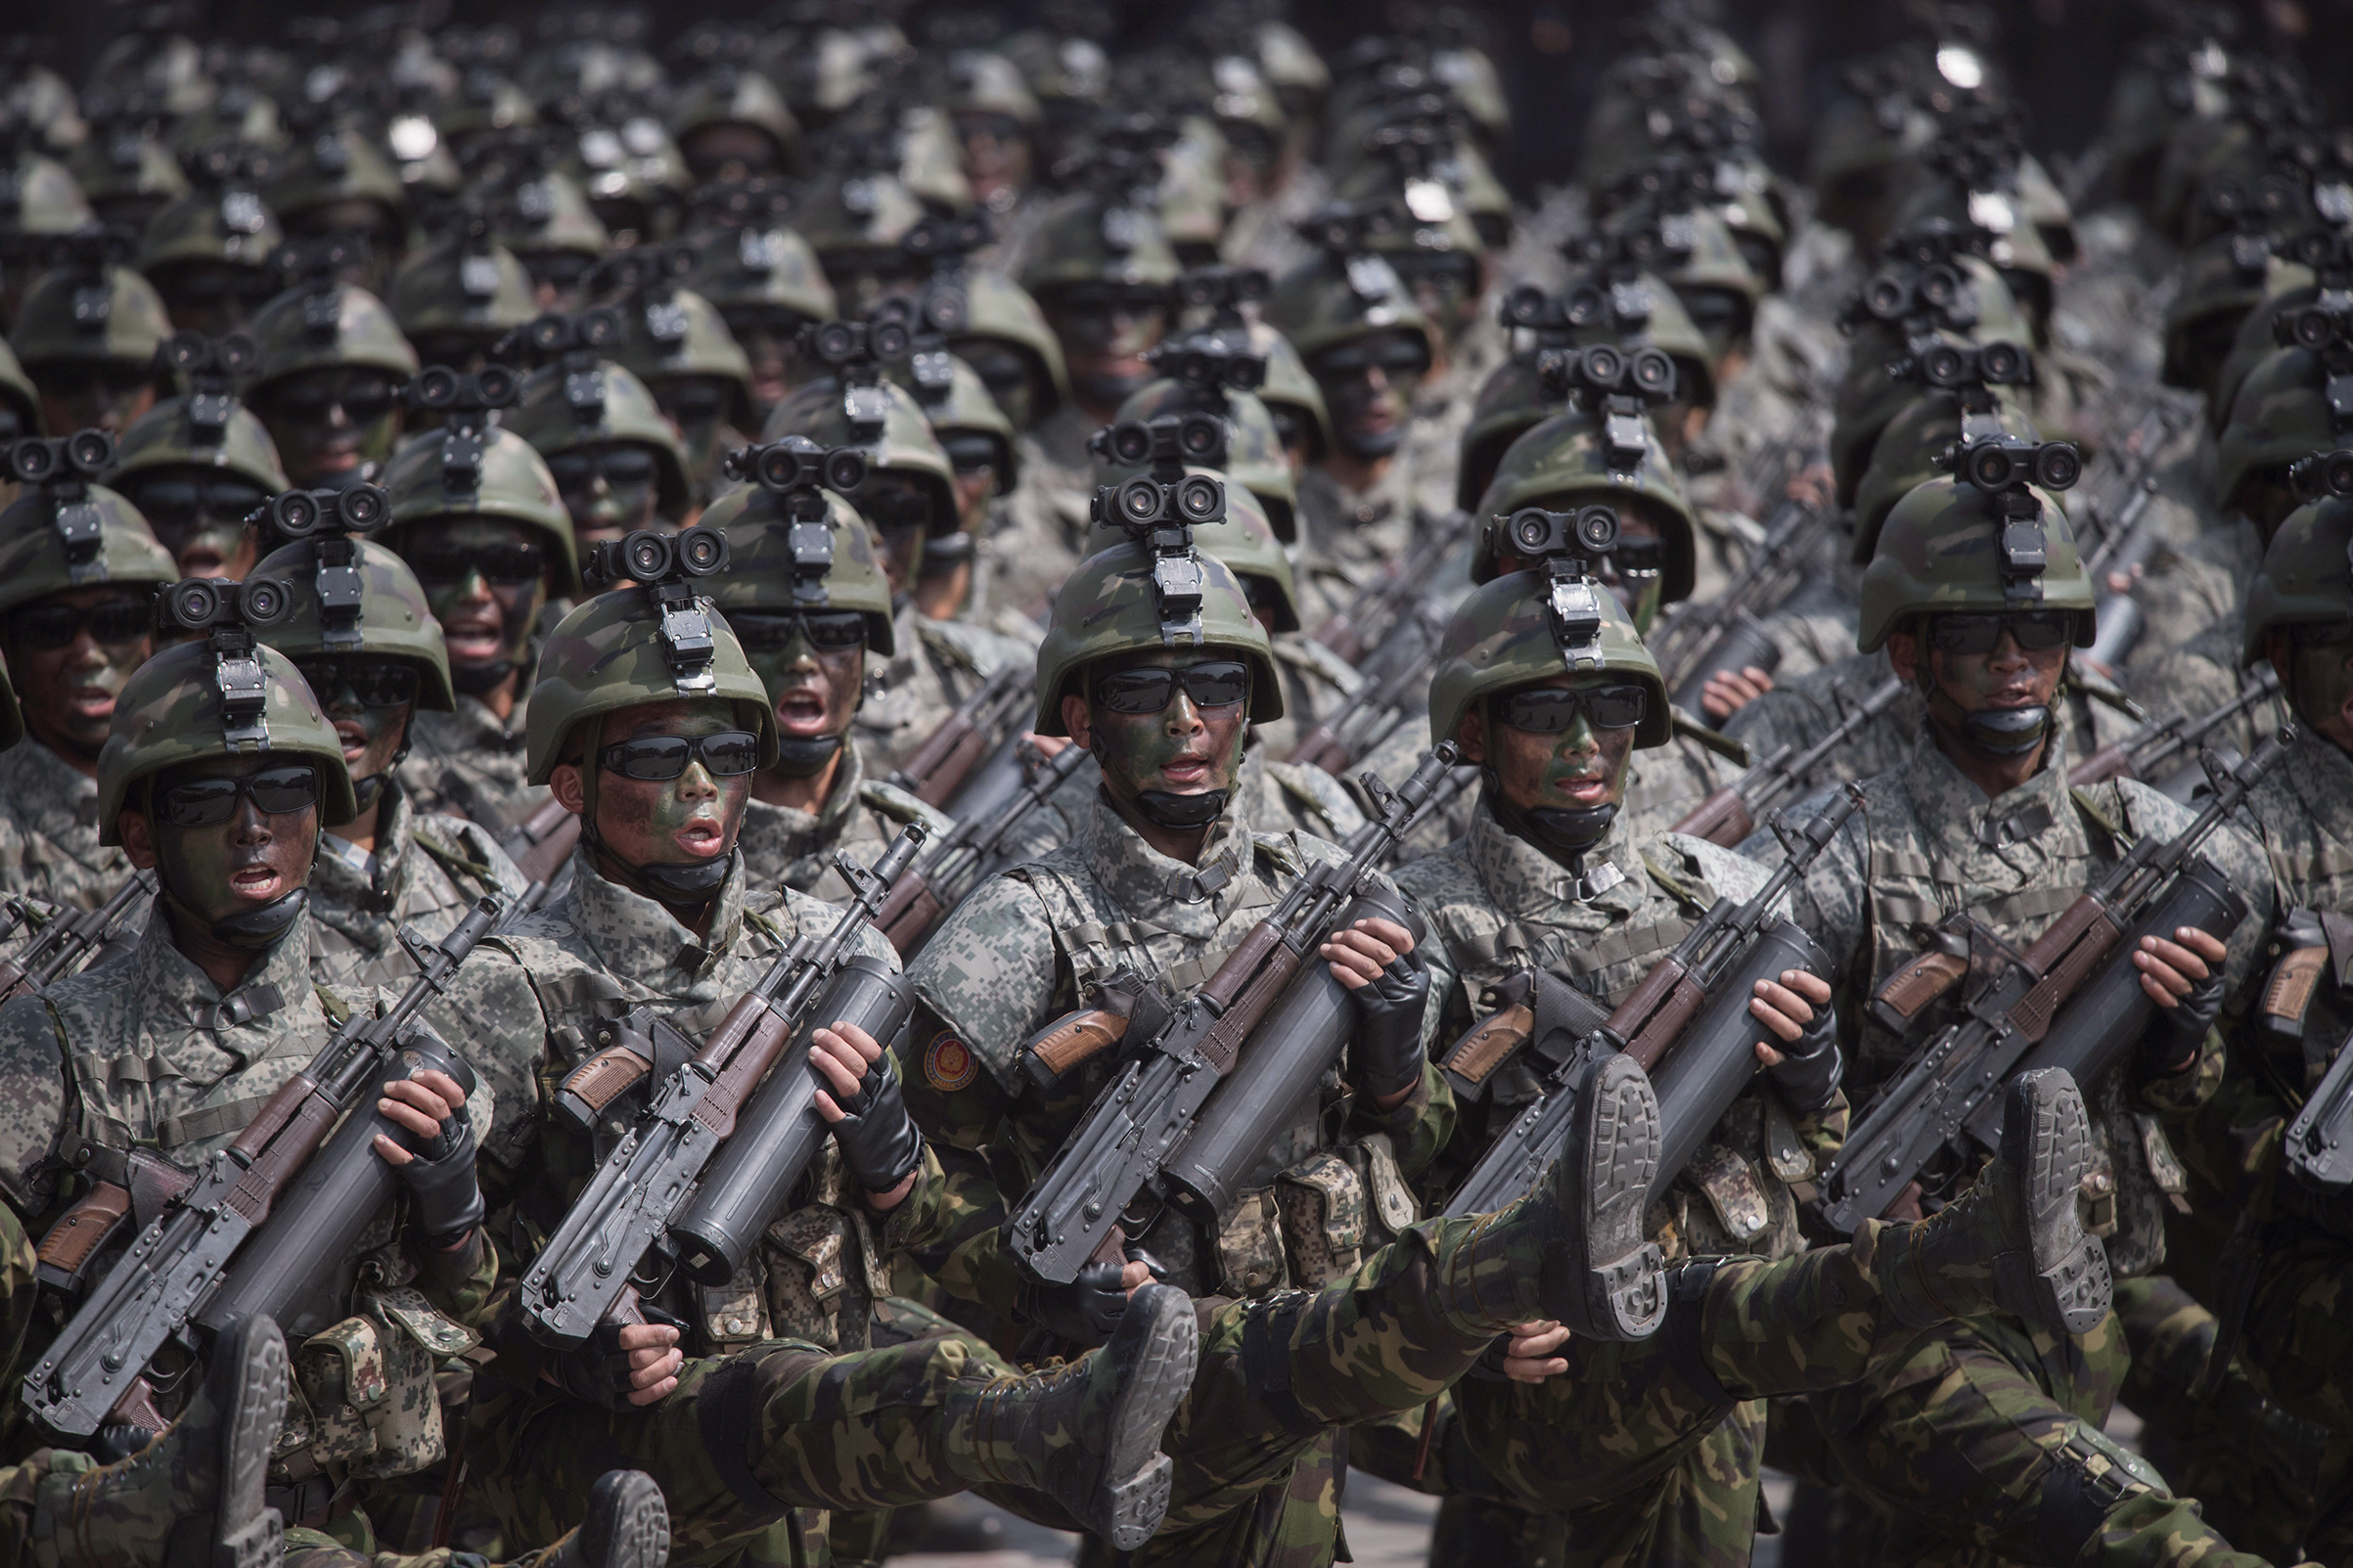 North Korean soldiers march in a military parade in Pyongyang on April 15 (Ed Jones—AFP/Getty Images)